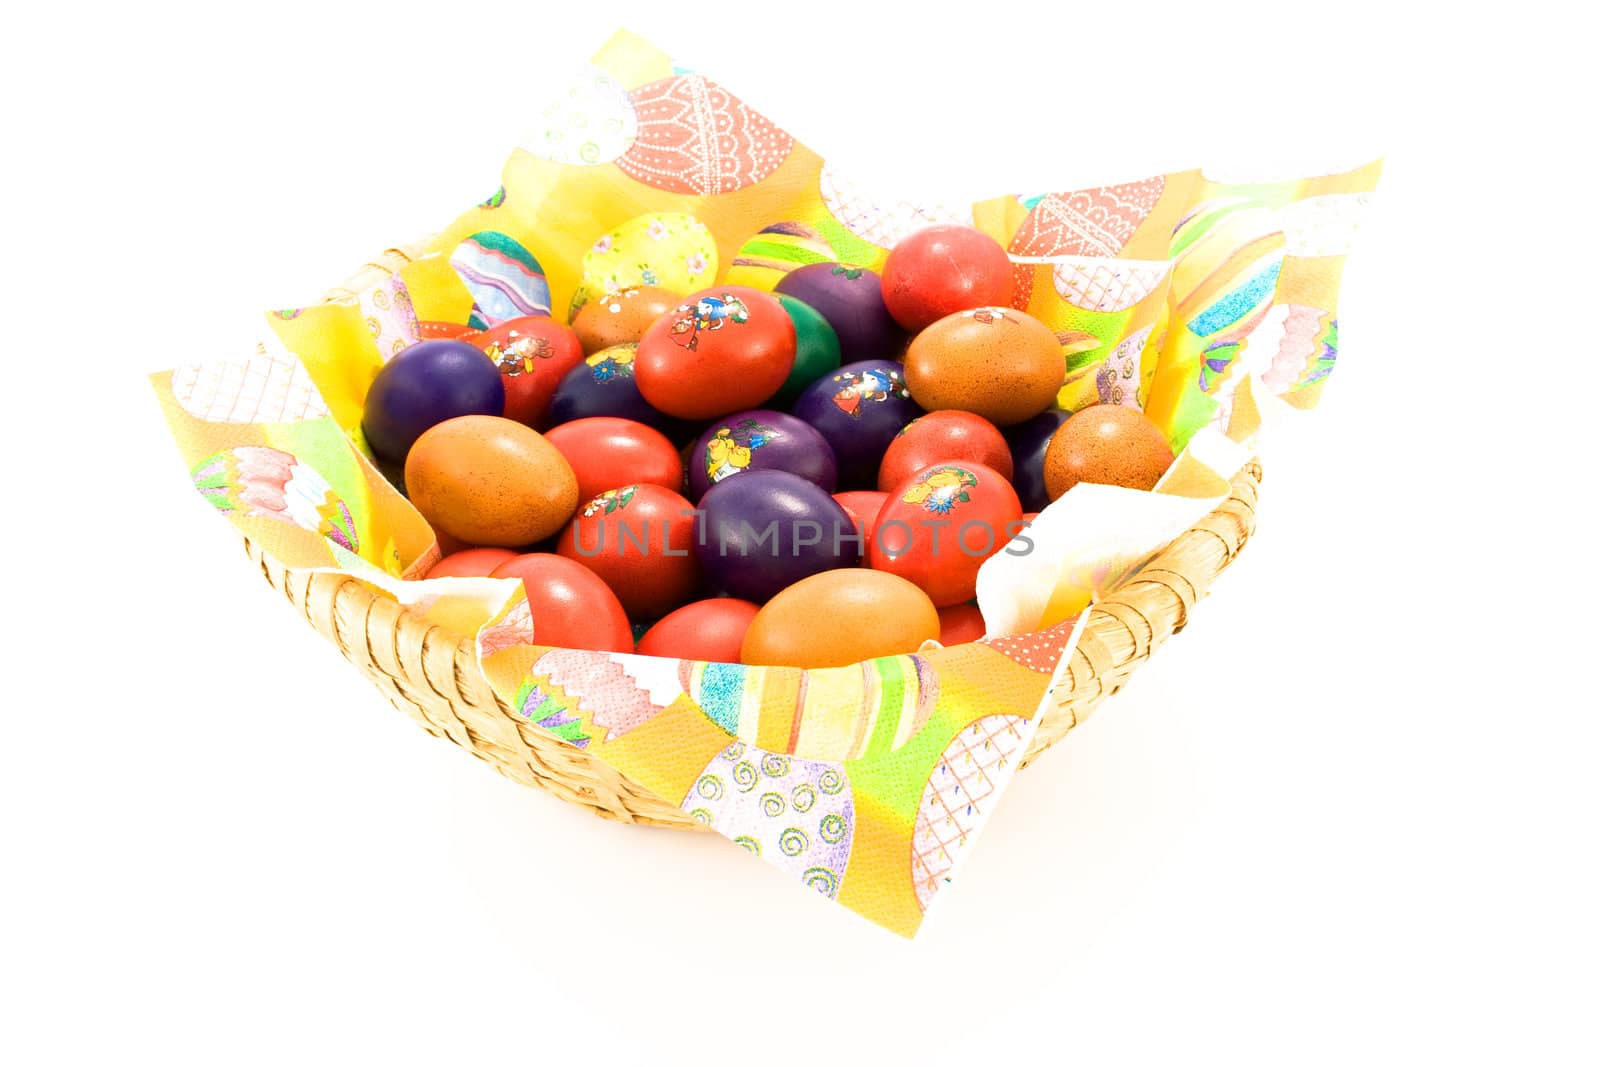 Wooden basket full of colorful Easter eggs. Isolated.